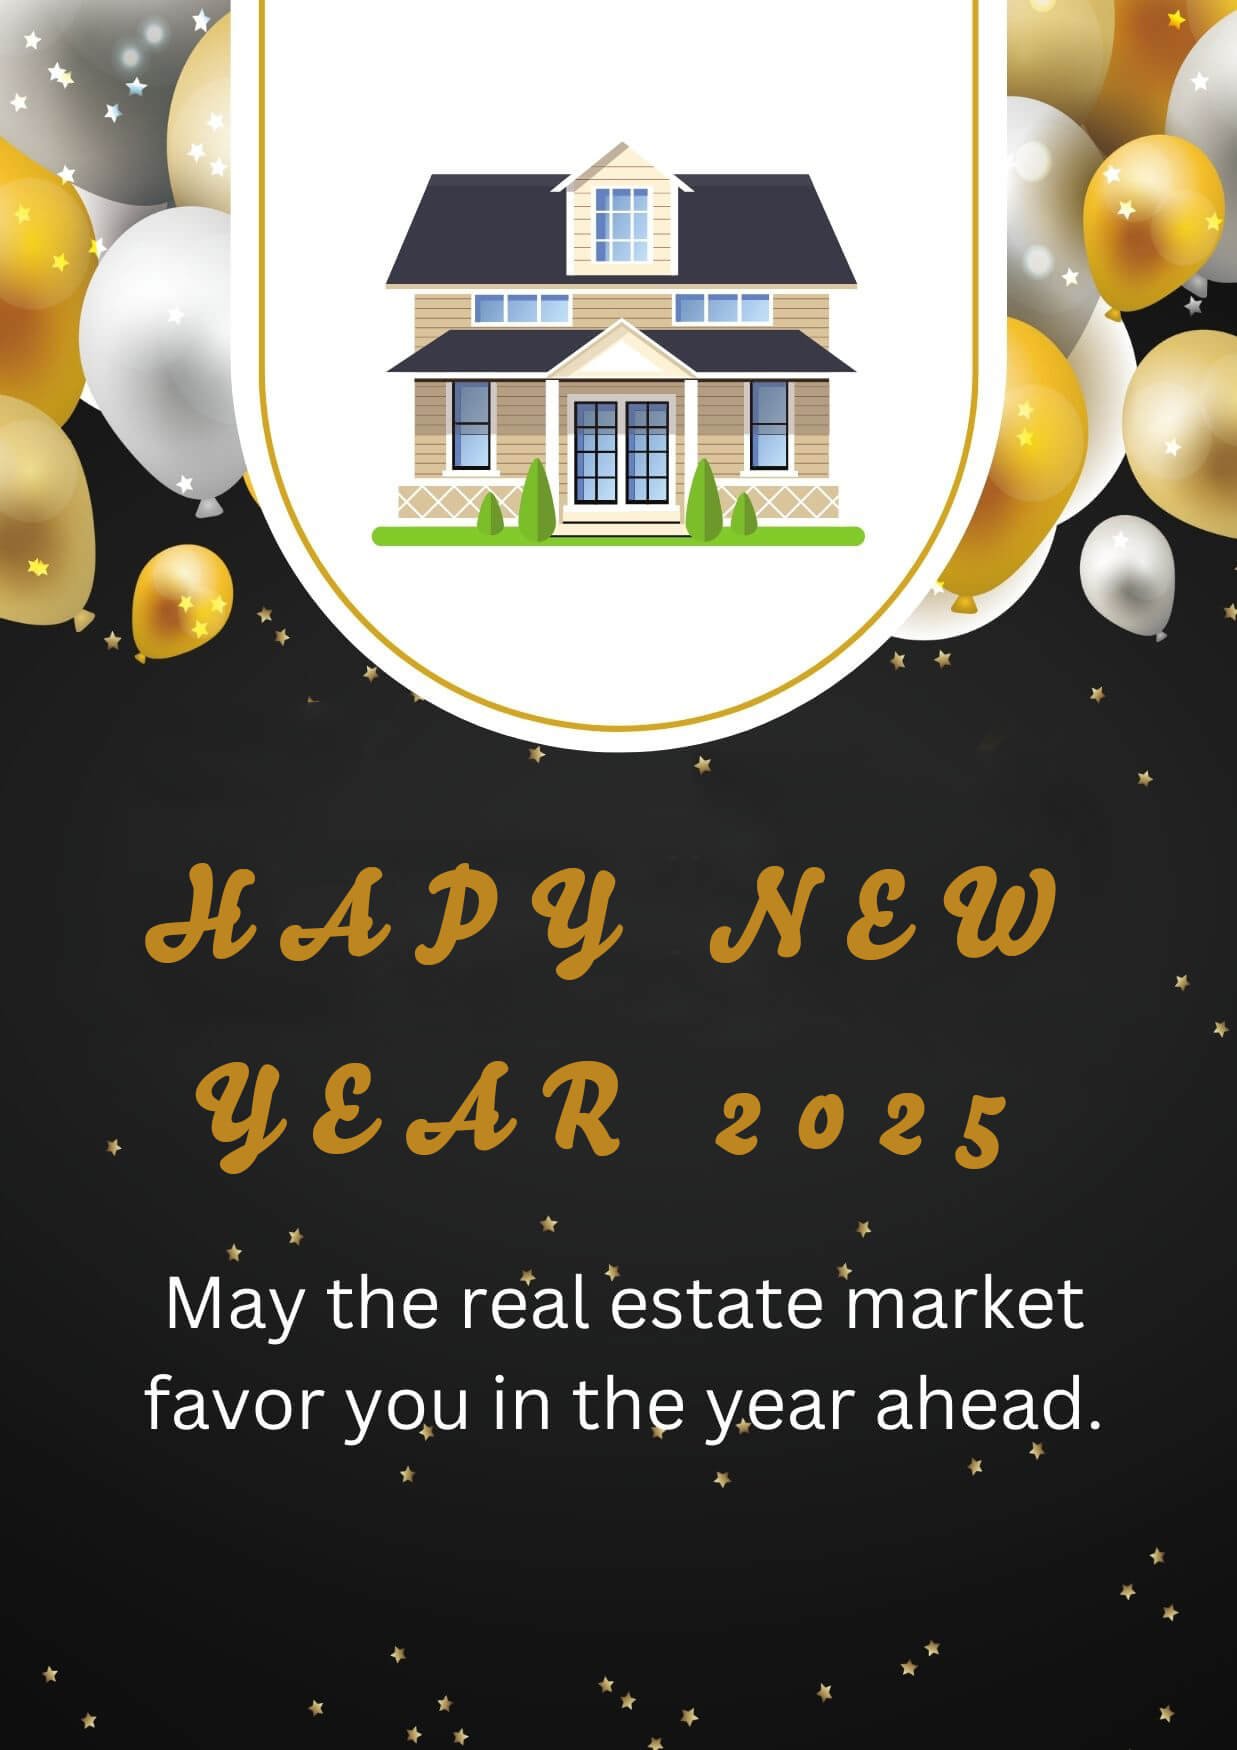 Happy 2025 New Year Wishes For Real Estate